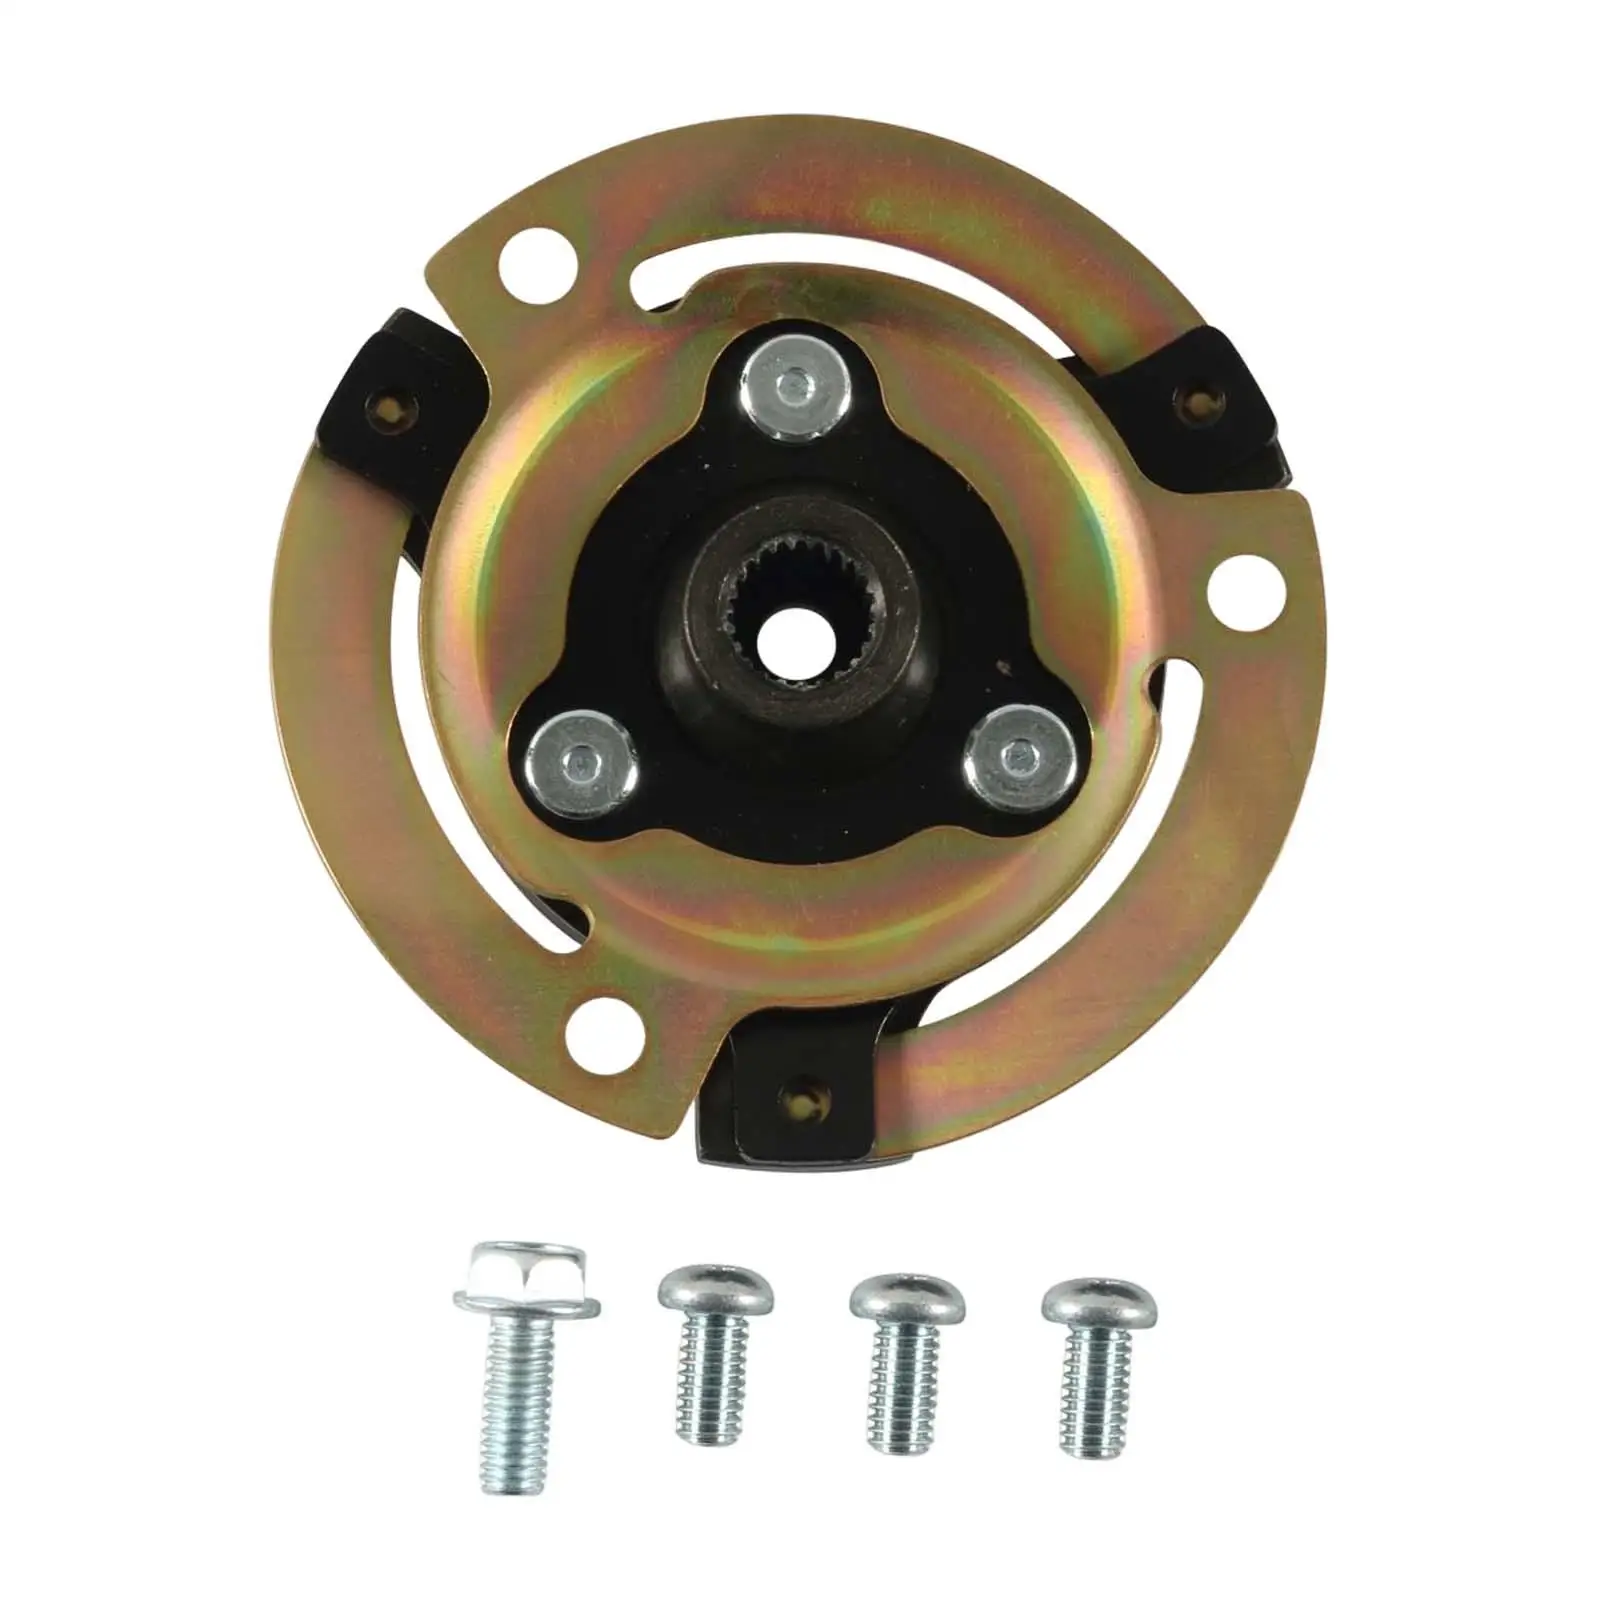 Auto A/C Air Conditioning Compressor Repair Kit 5K0820803A with Mounting Screws Clutch Hub Plate Pulley Clutch for VW Golf